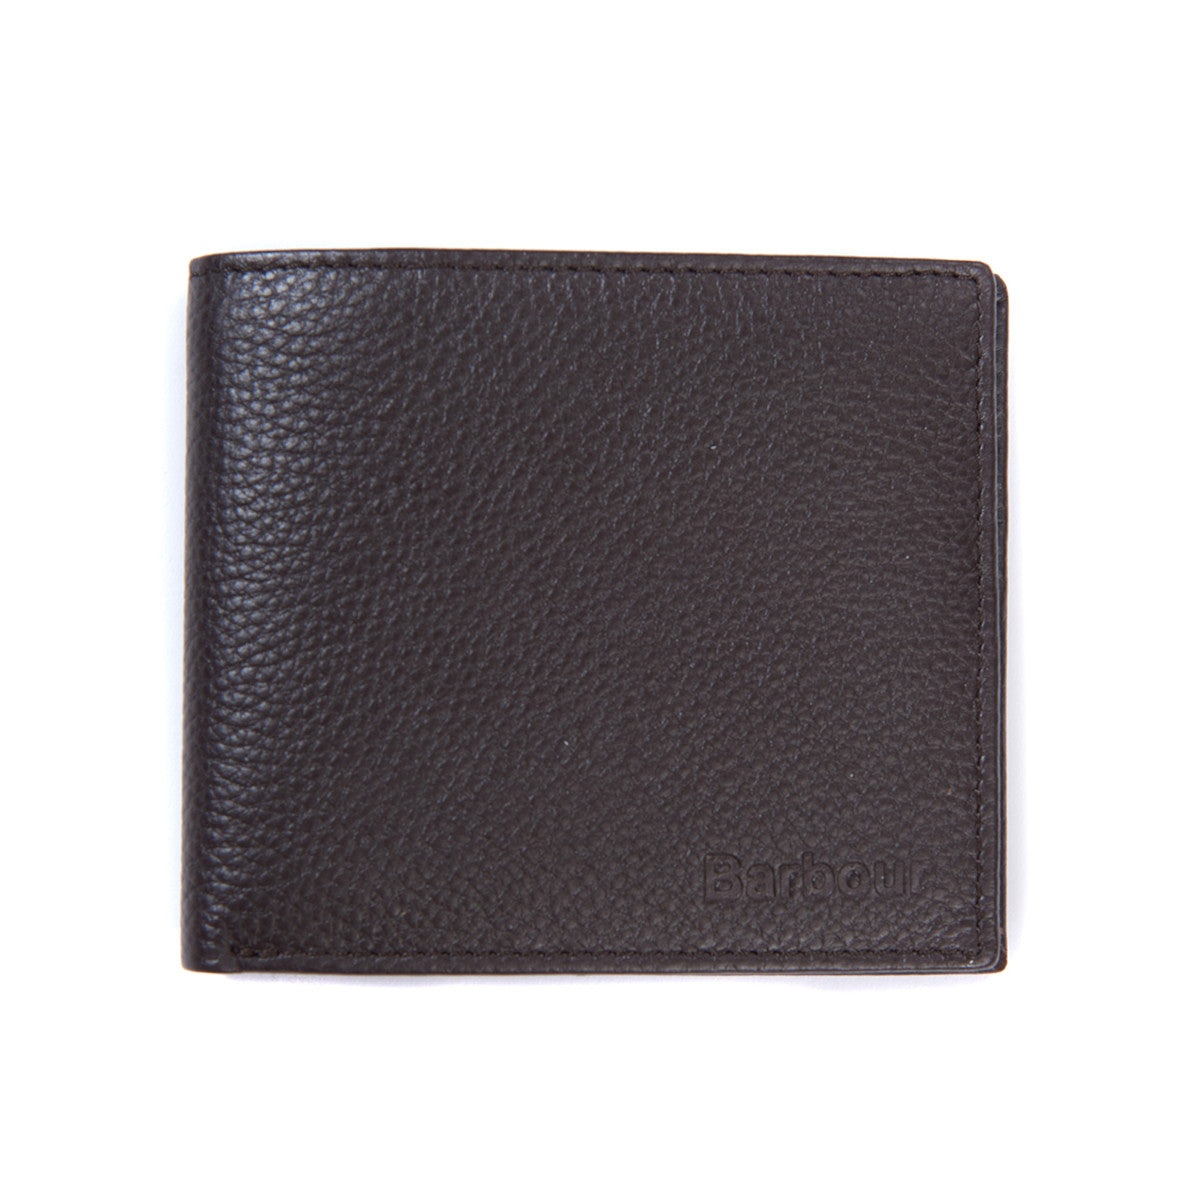 Barbour Amble Leather Billfold BR71  Mahogany